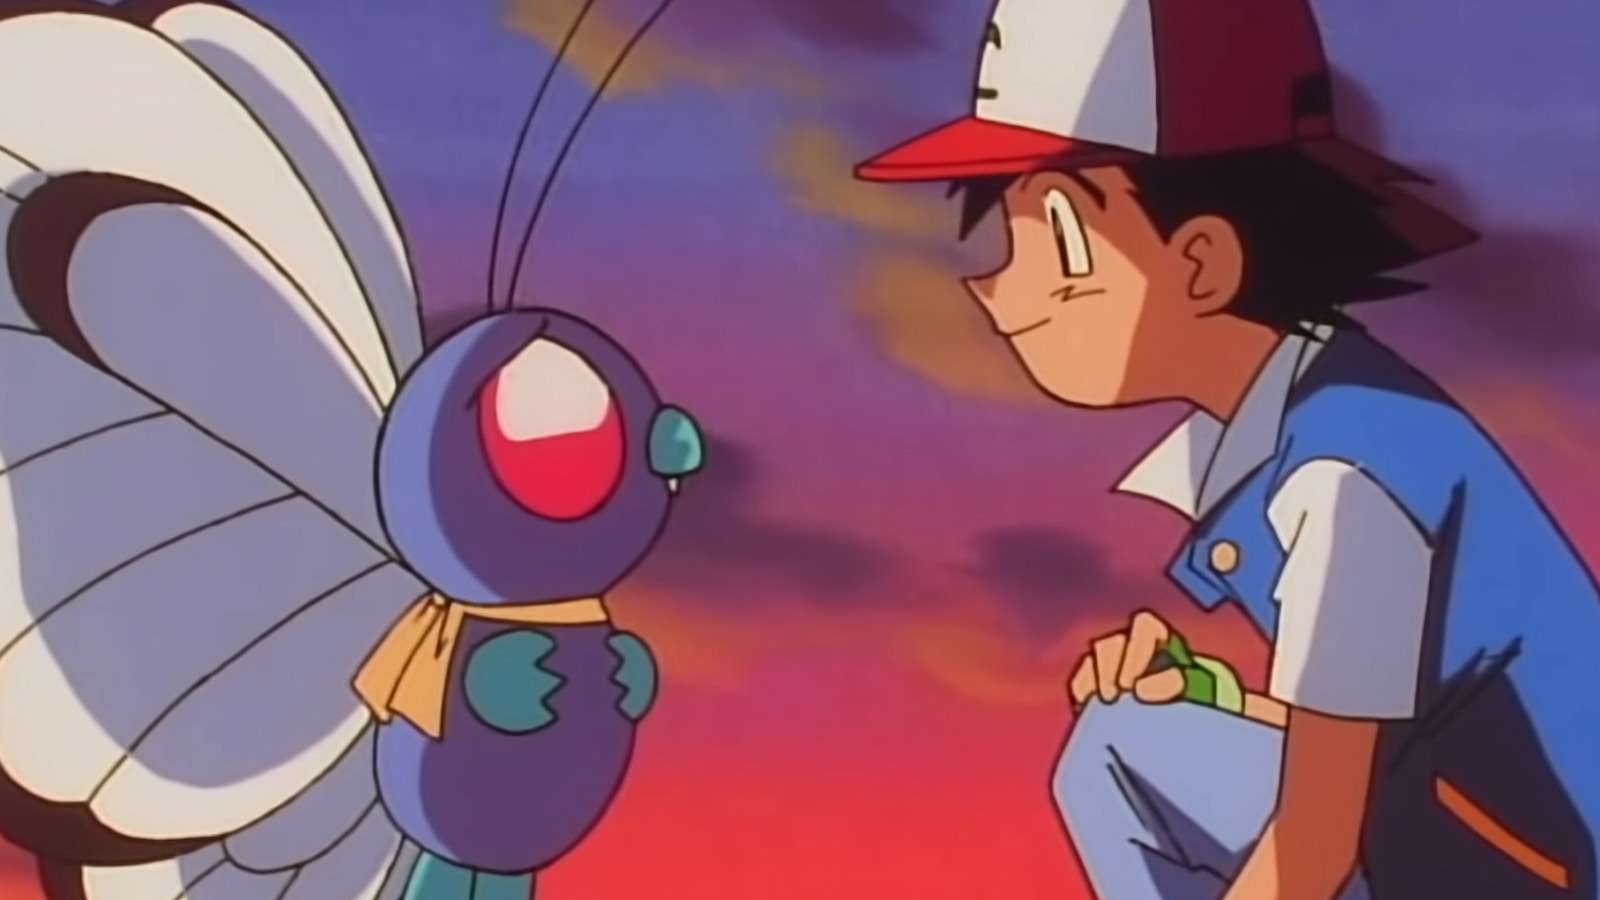 Ash says goodbye to Butterfree in the Pokemon anime